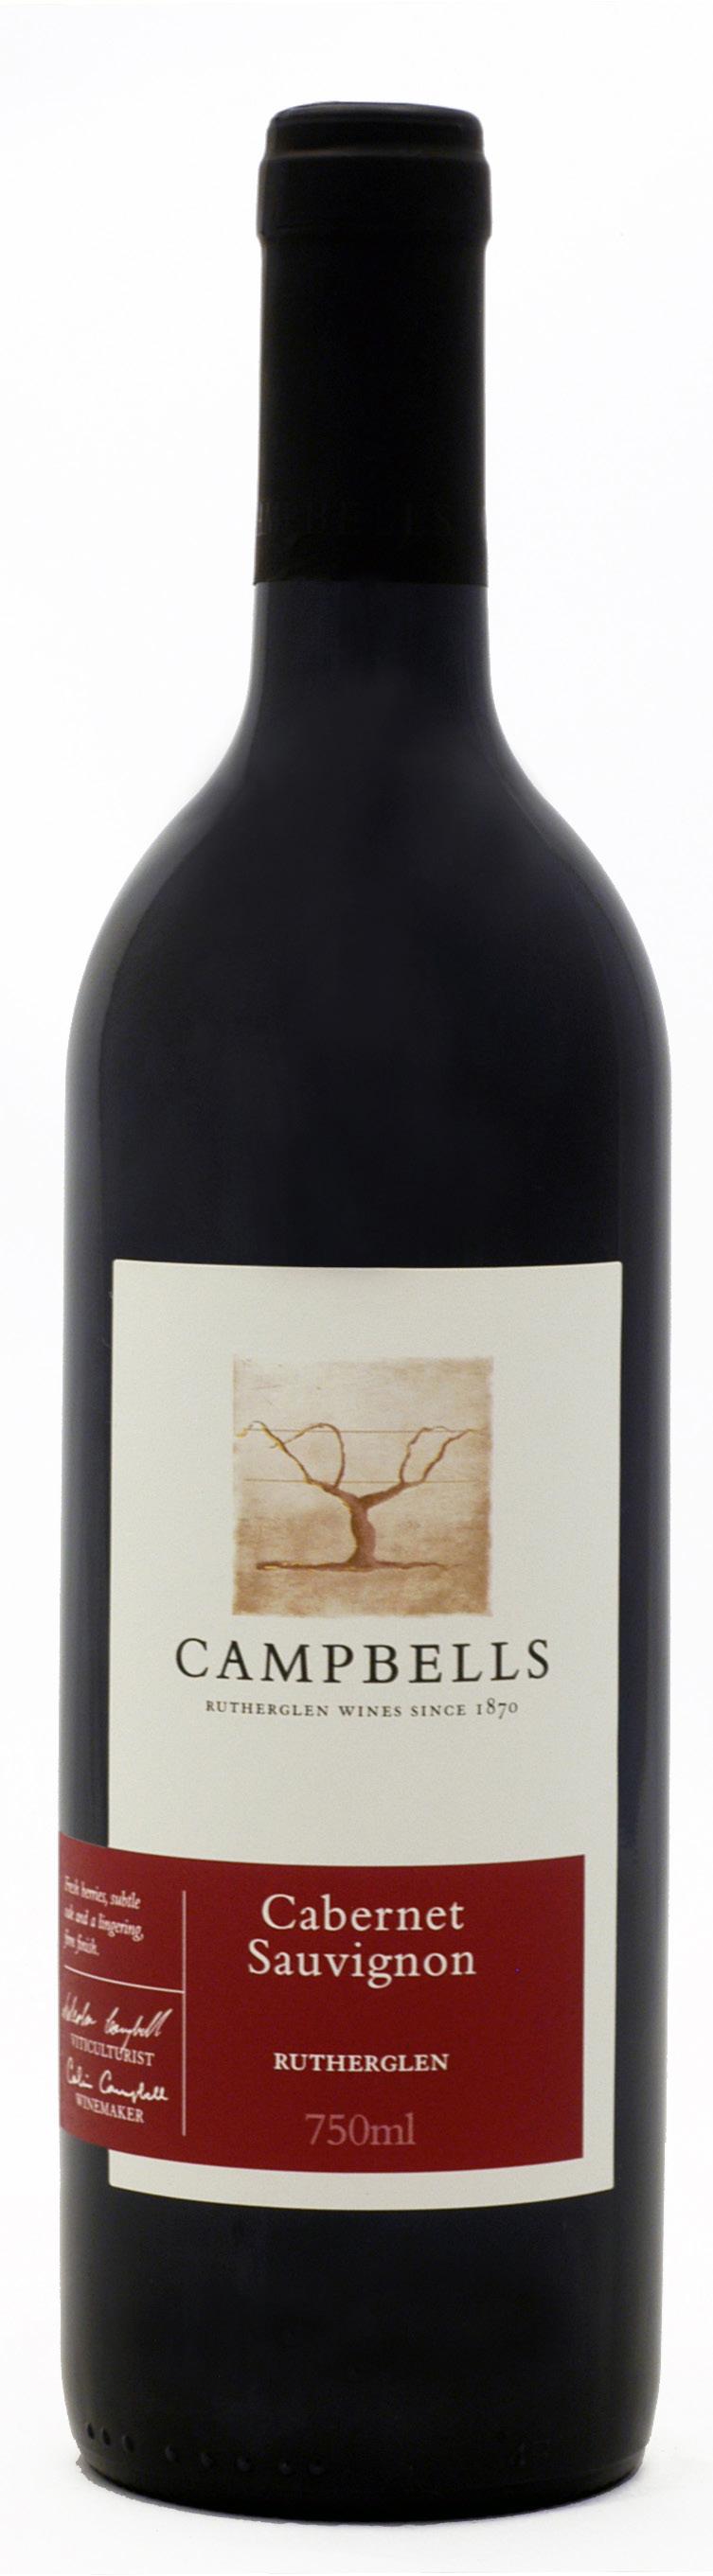 CABERNET SAUVIGNON - 2010 Our Cabernet Sauvignon displays all the hallmarks of our Rutherglen reds, pure rich fruit, true varietal character and the tannin structure for longevity. Earthy red.